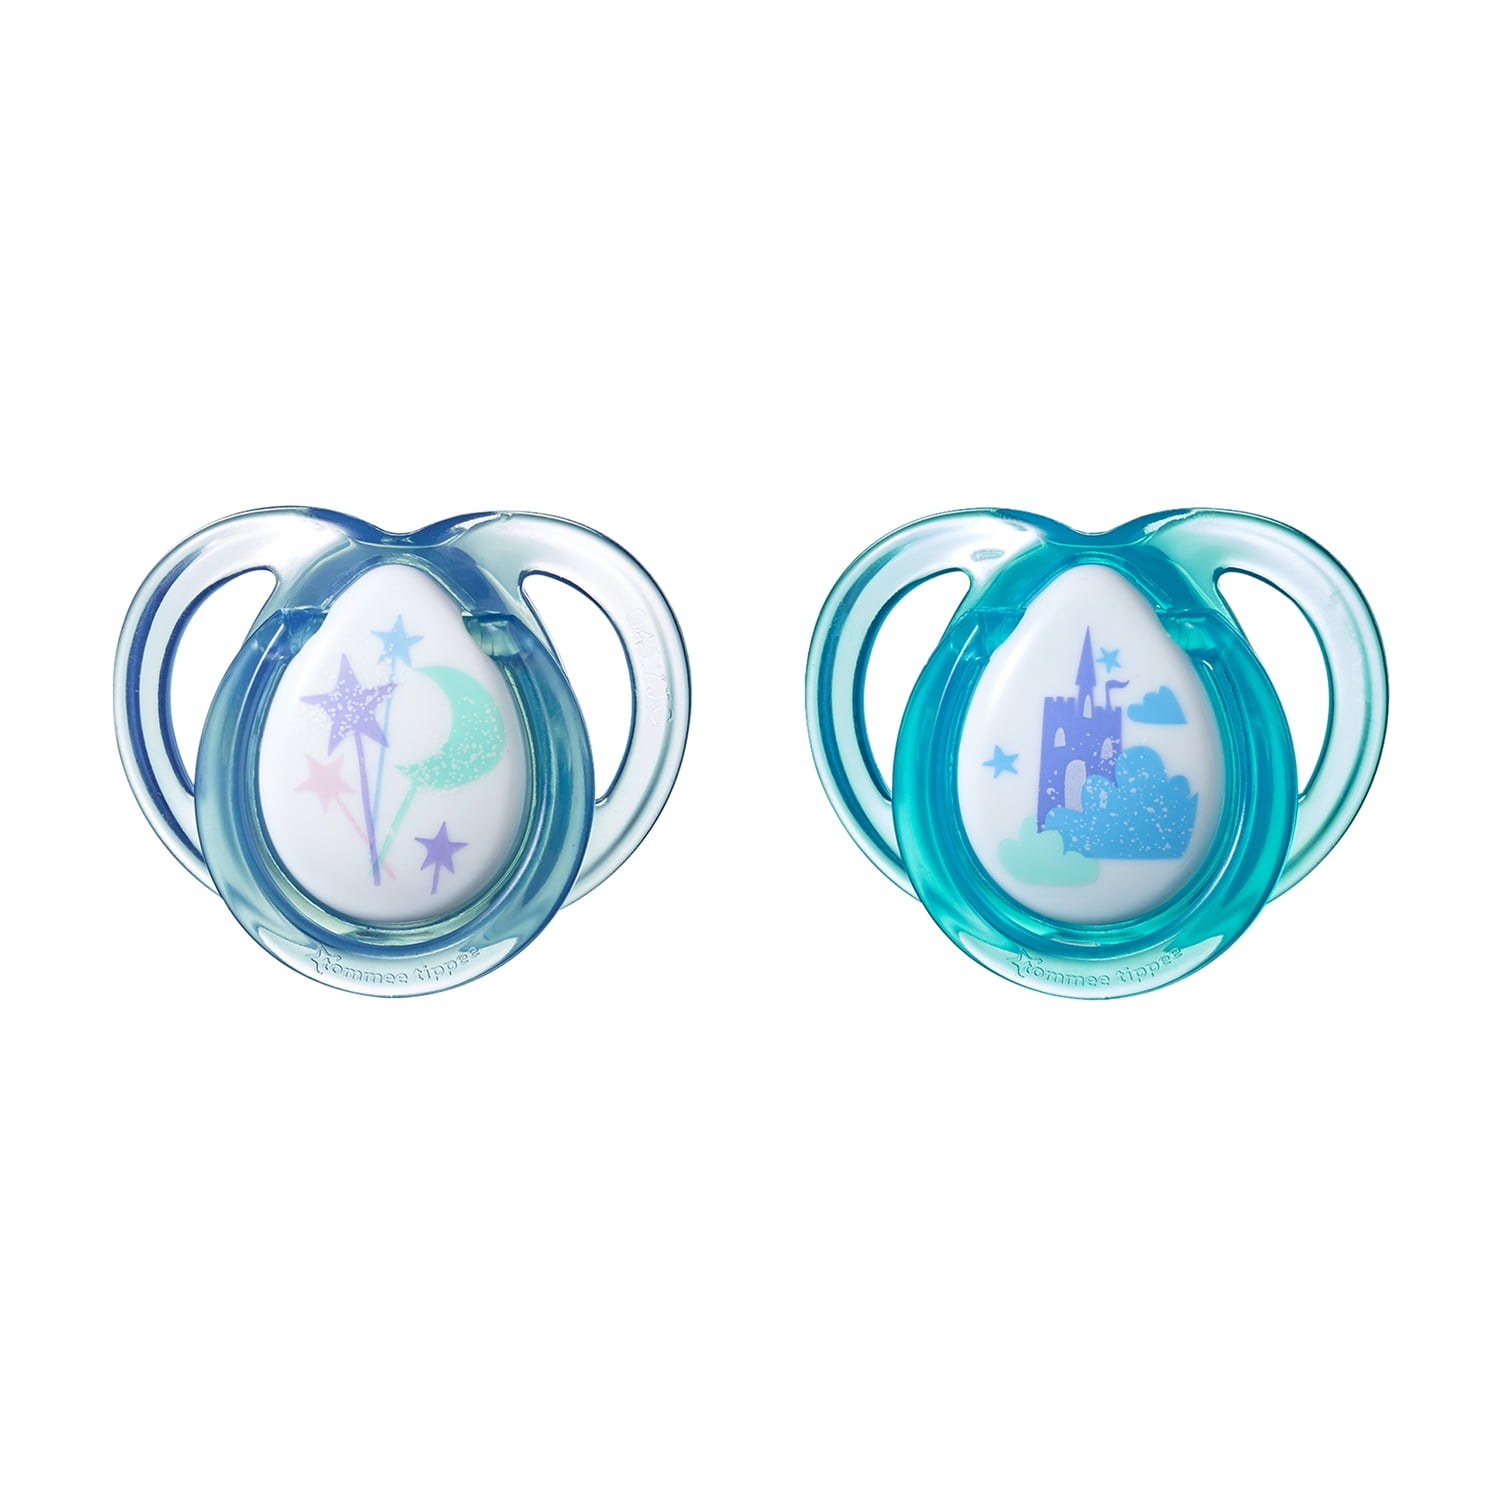 Tommee Tippee Every Day Pacifiers, Symmetrical Design, BPA-Free Silicone -  0-6 months, 2 Count